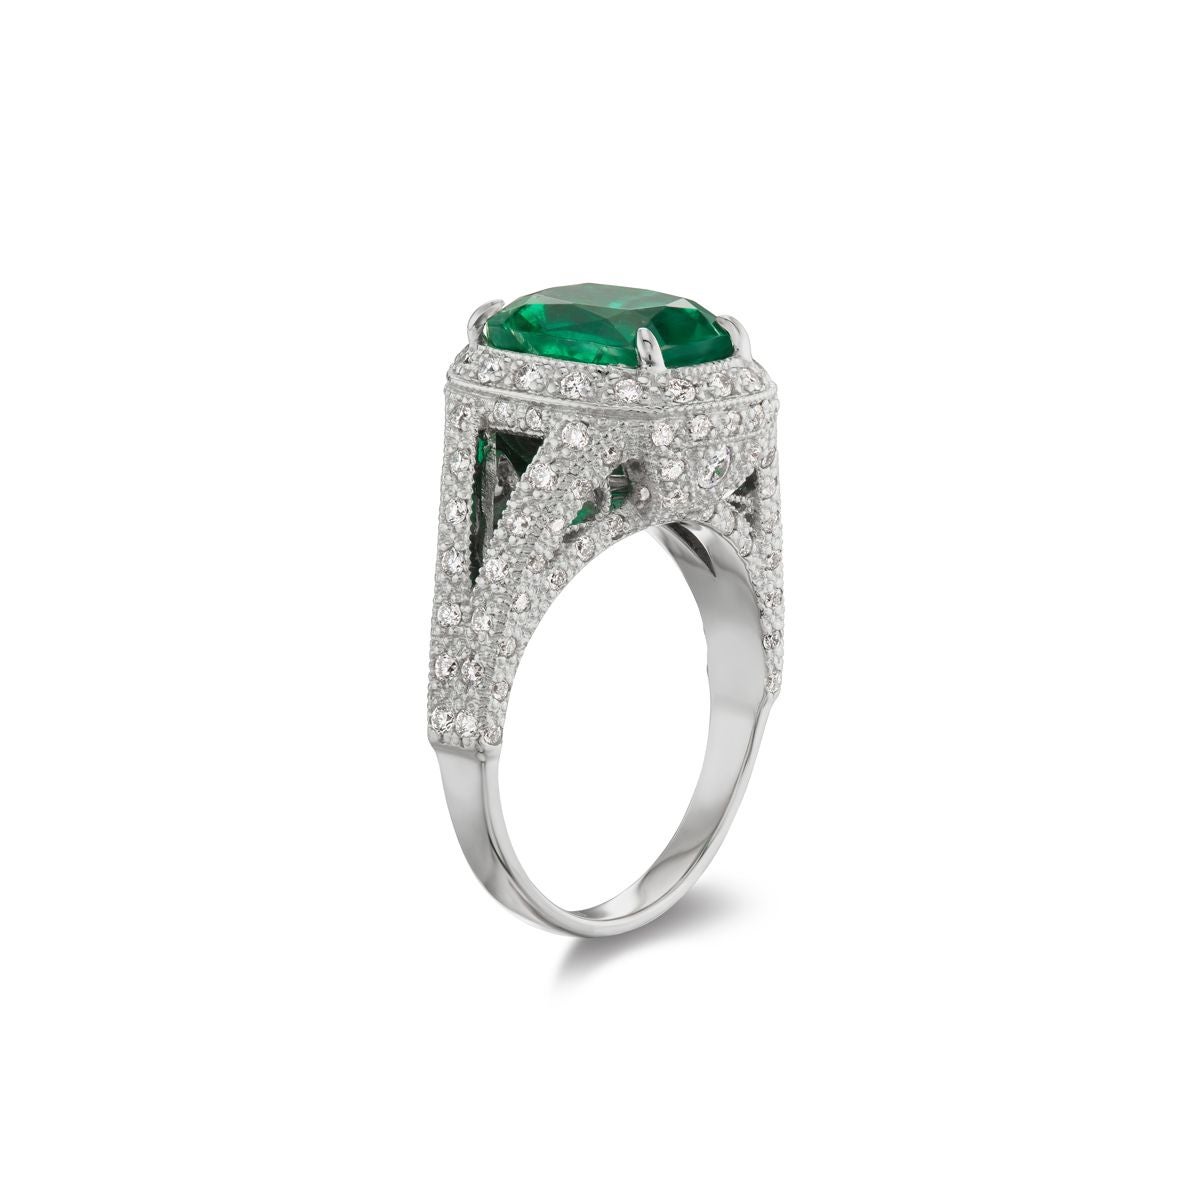 18k White Gold 3.20ct Emerald And .96ct Diamond Ring
Dive deep into the luscious green color of this beautiful 3 ct Emerald
surrounded in a halo setting of round shaped diamonds
Item: # 03868
Metal: 18k White Gold
Color Weight: 3.20 ct.
Diamond